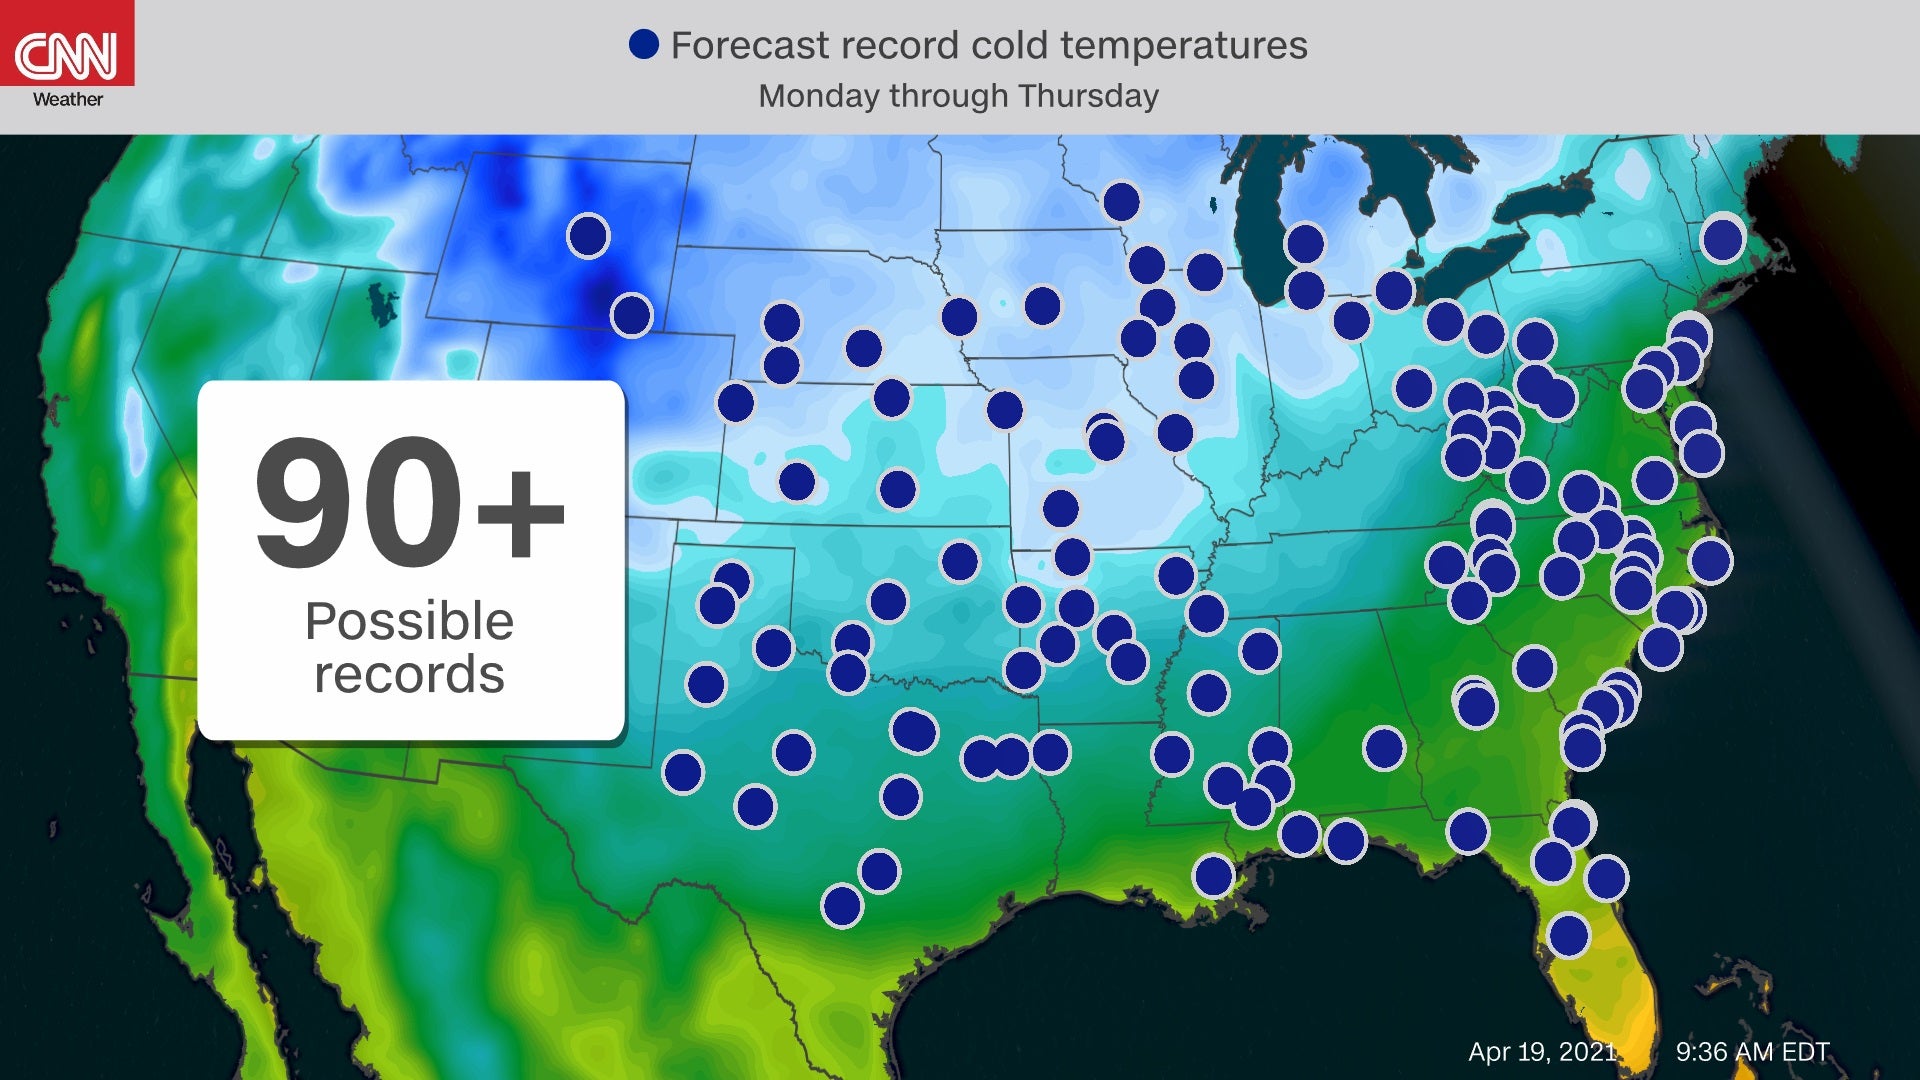 Old Man Winter to bring unusual lateseason snow, record cold to US